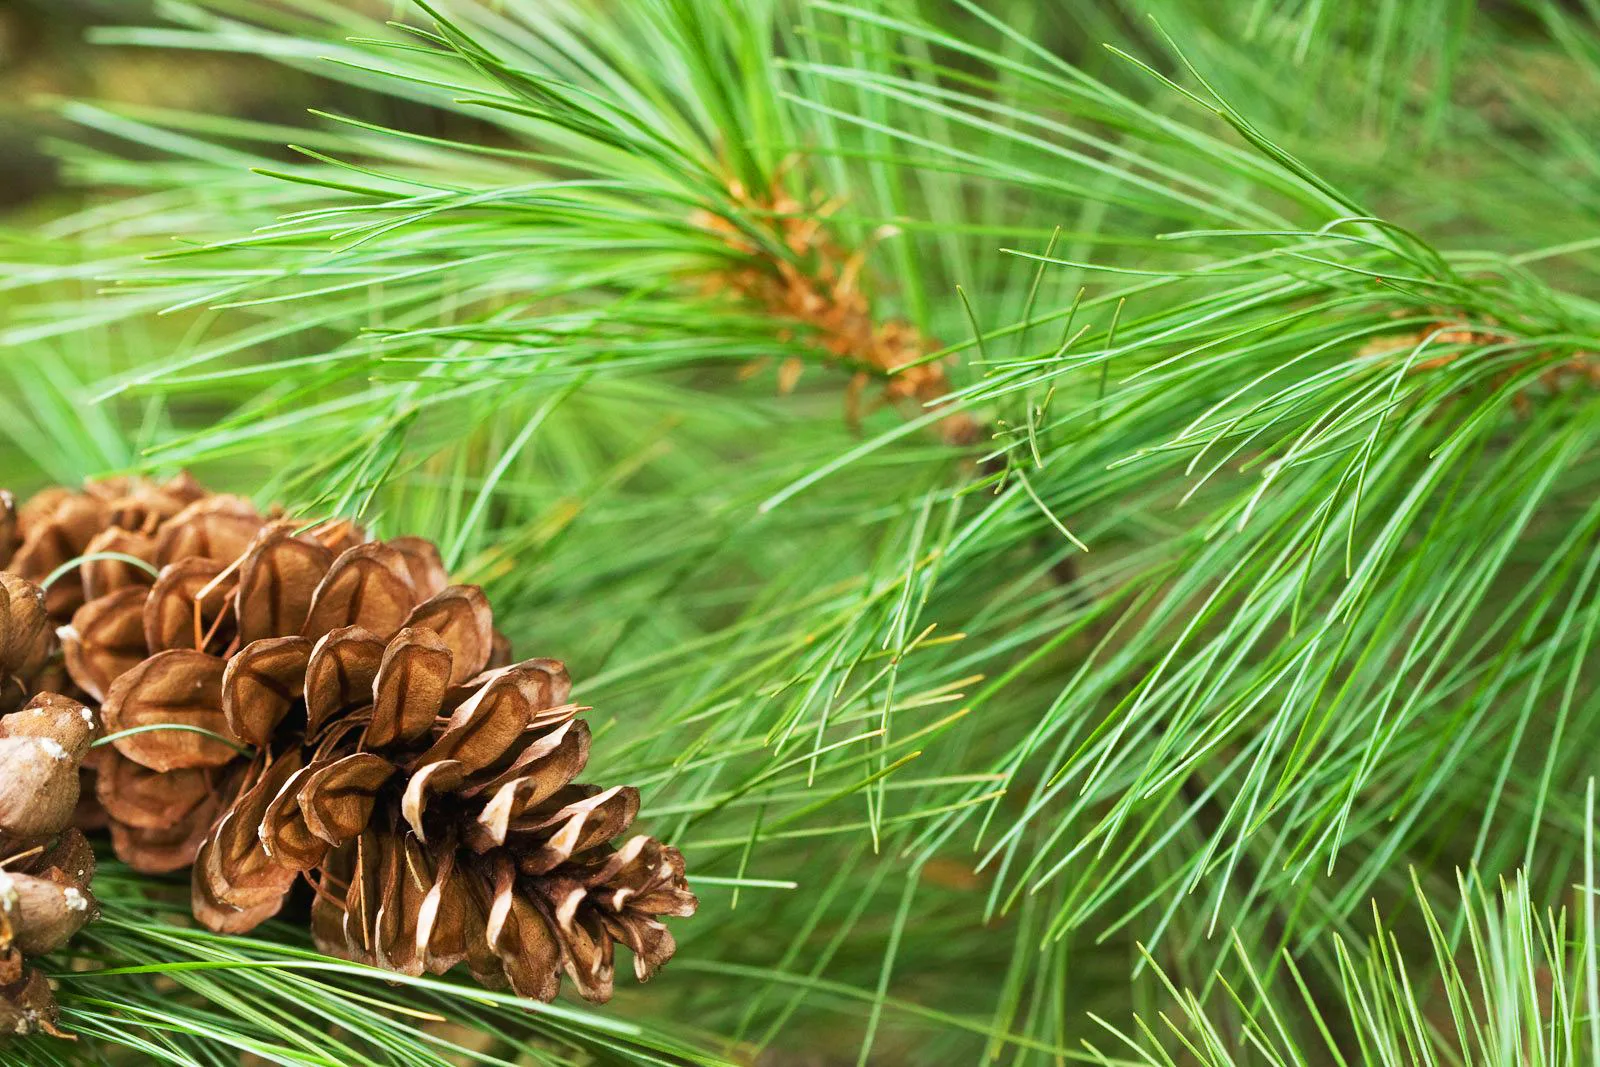 Close up of evergreen branches with vibrant green pine needles in